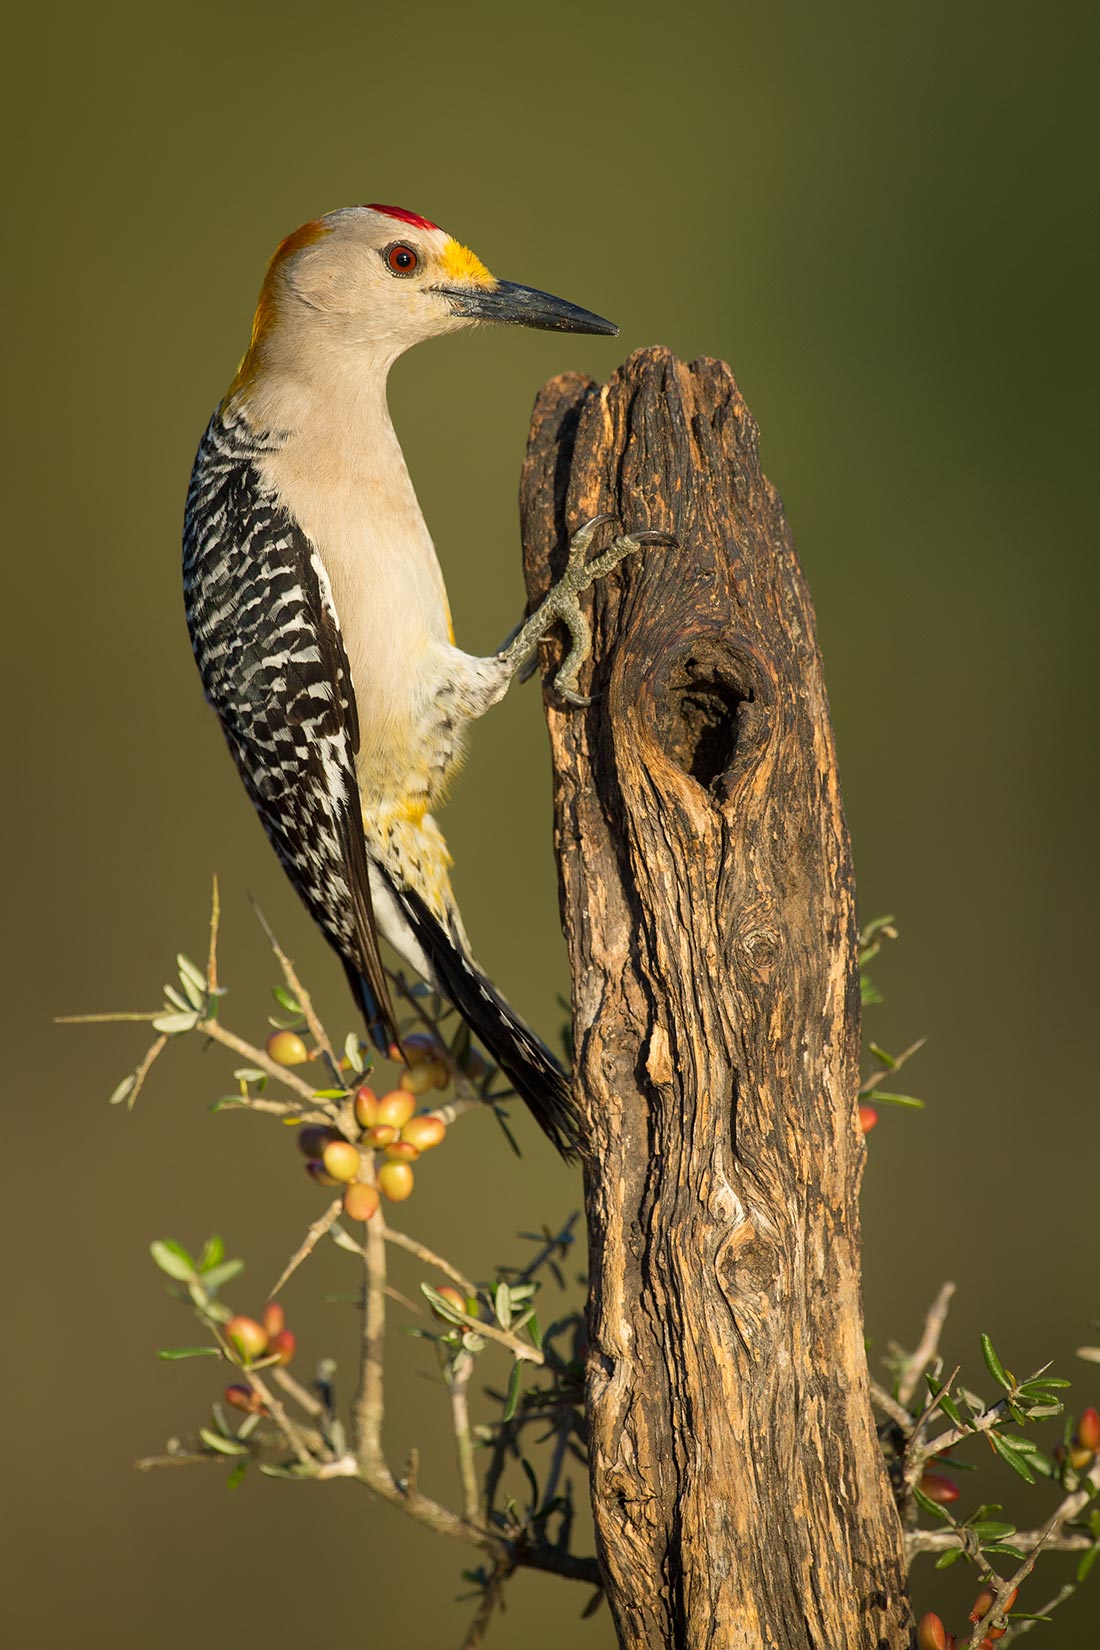 Gold-fronted woodpecker